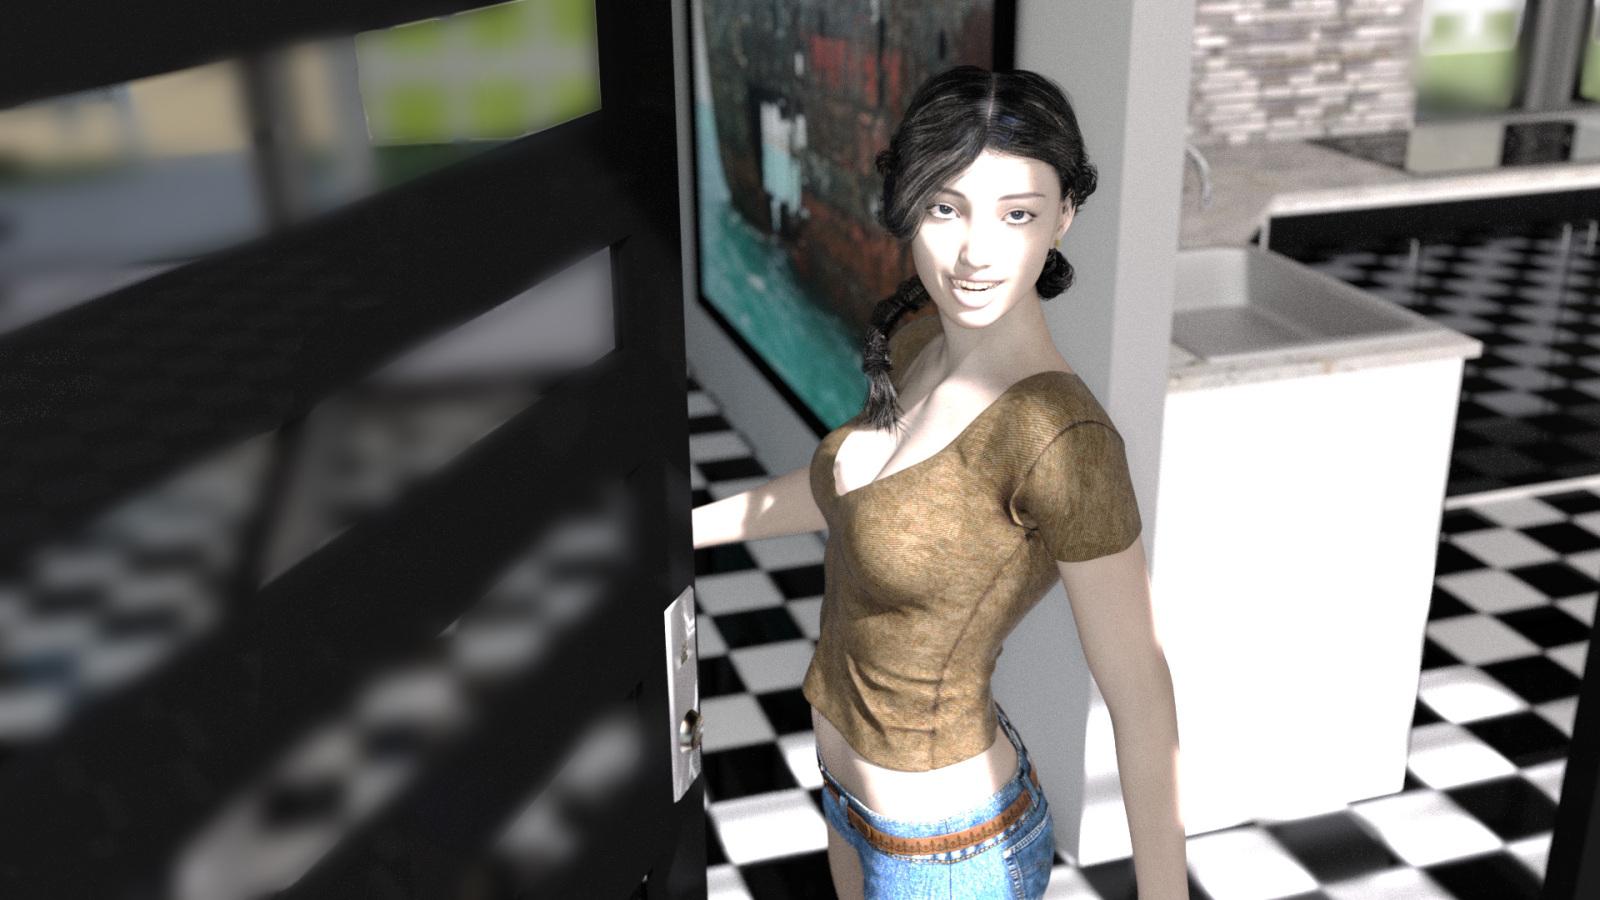 Your Choice Version 1.42 by lusi3d